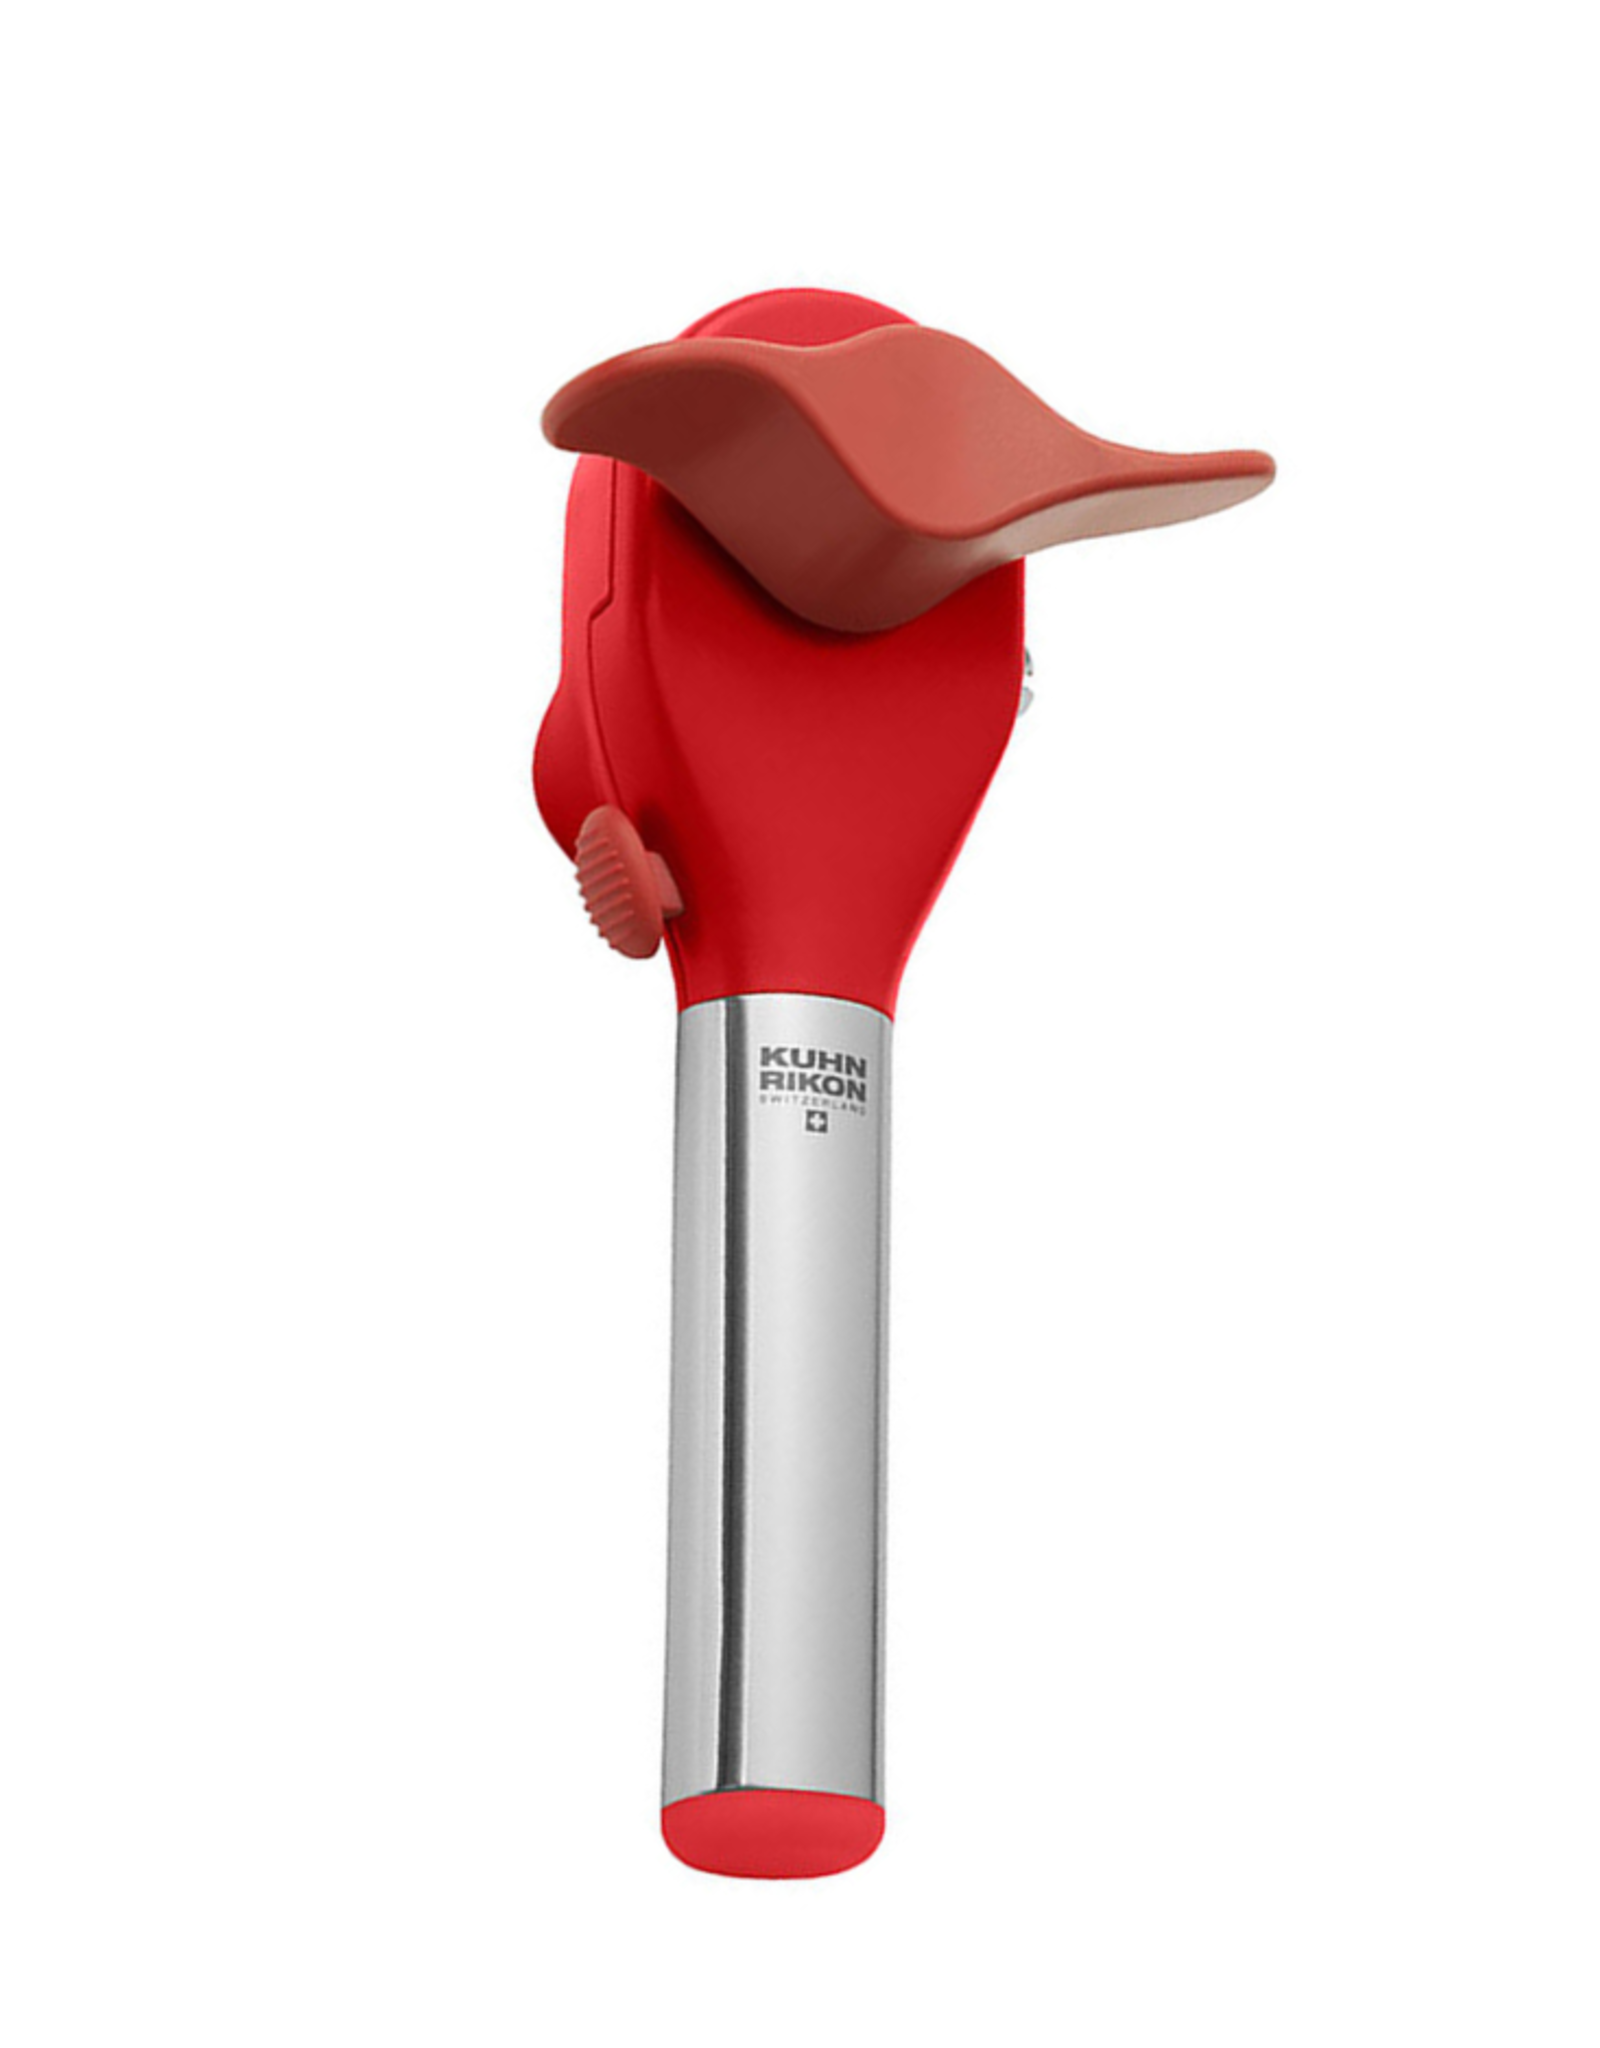 Kuhn Rikon Auto Deluxe Safety LidLifter Can Opener, Red